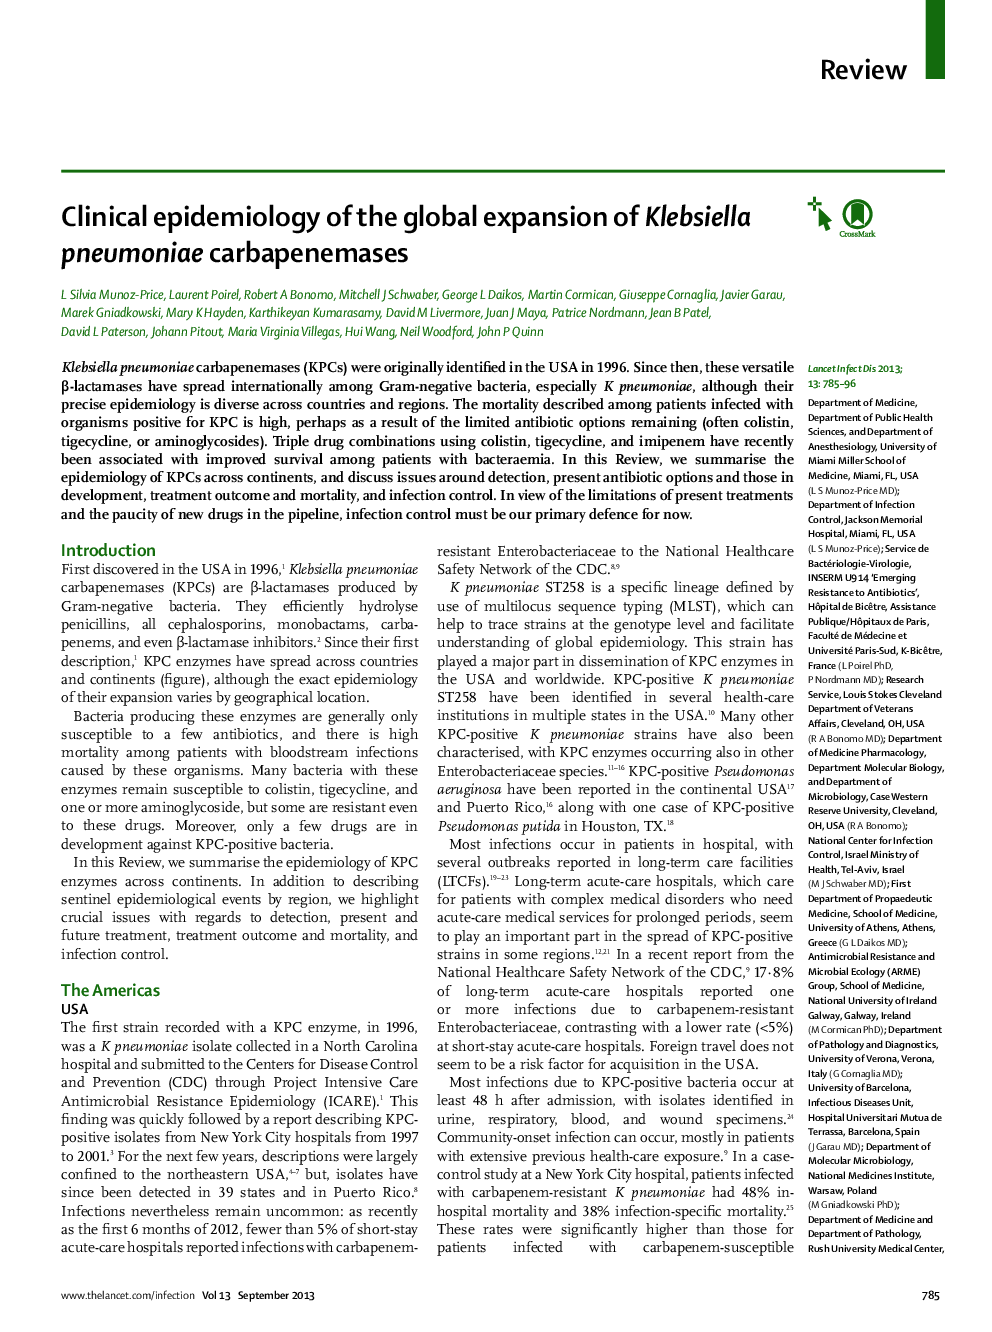 Clinical epidemiology of the global expansion of Klebsiella pneumoniae carbapenemases